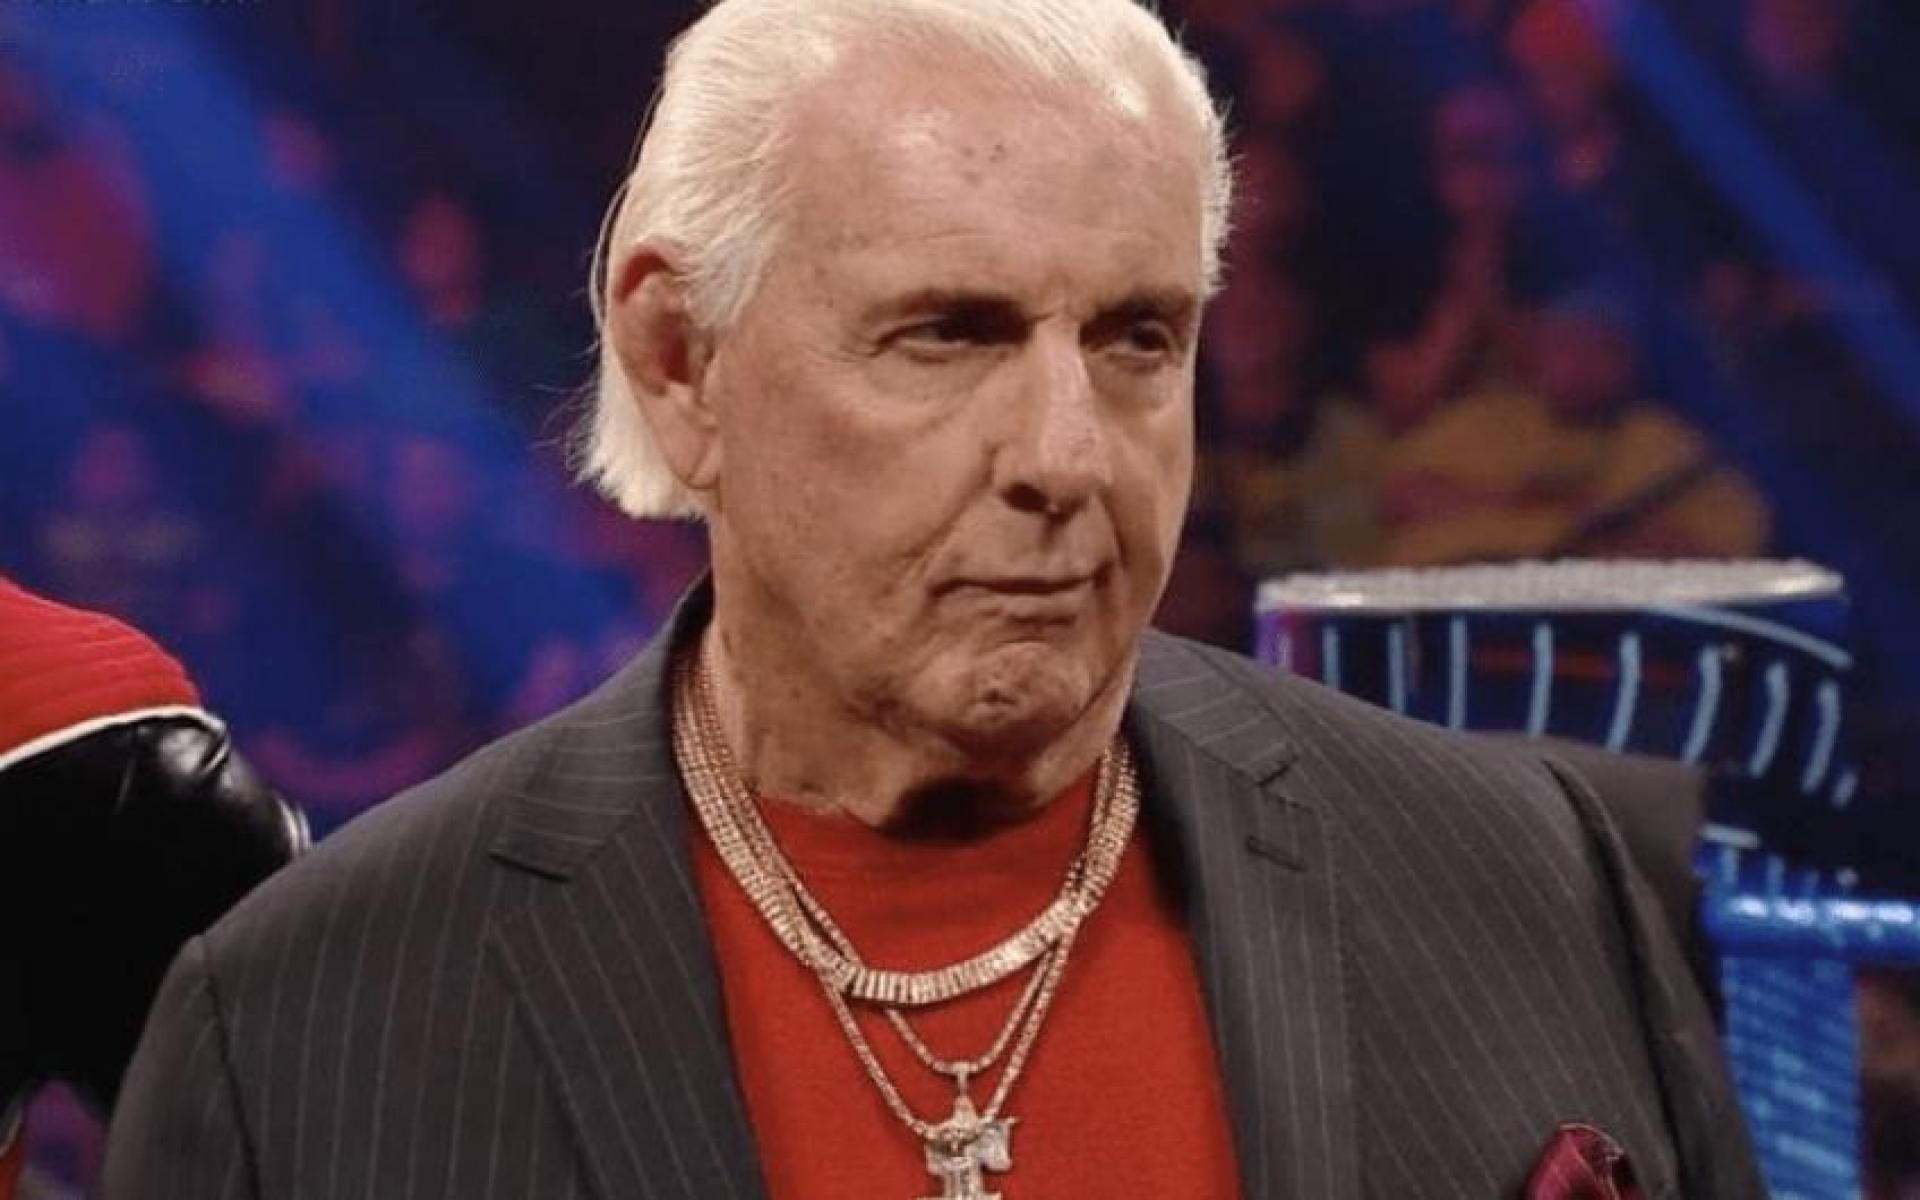 Ric Flair is a big fan of Randy Orton and MJF